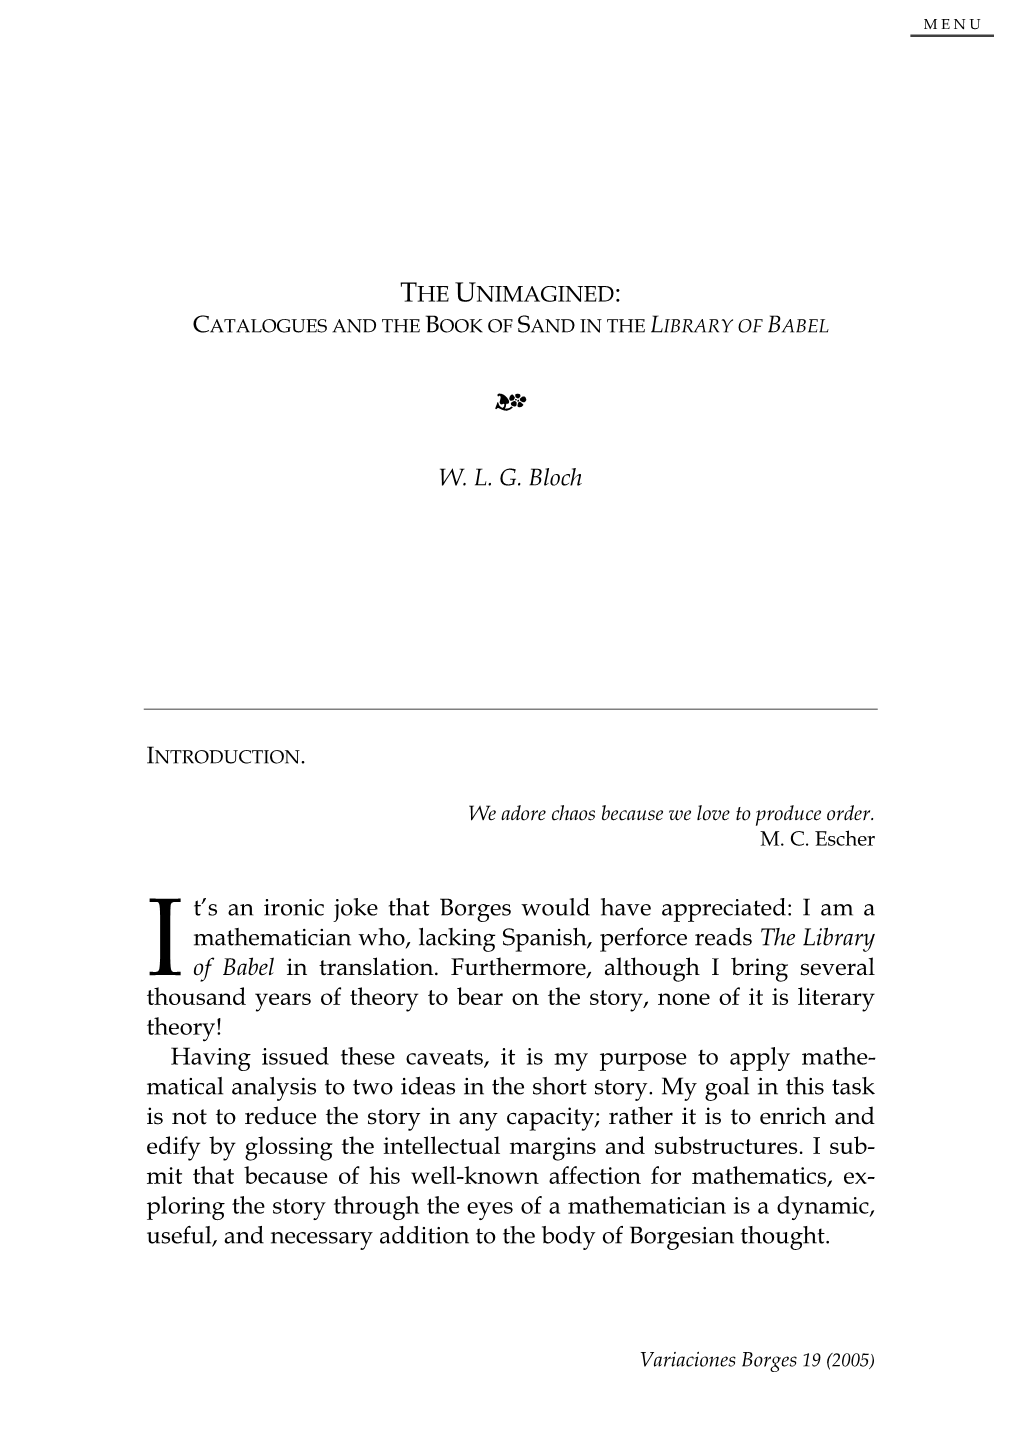 The Unimagined: Catalogues and the Book of Sand in the Library of Babel